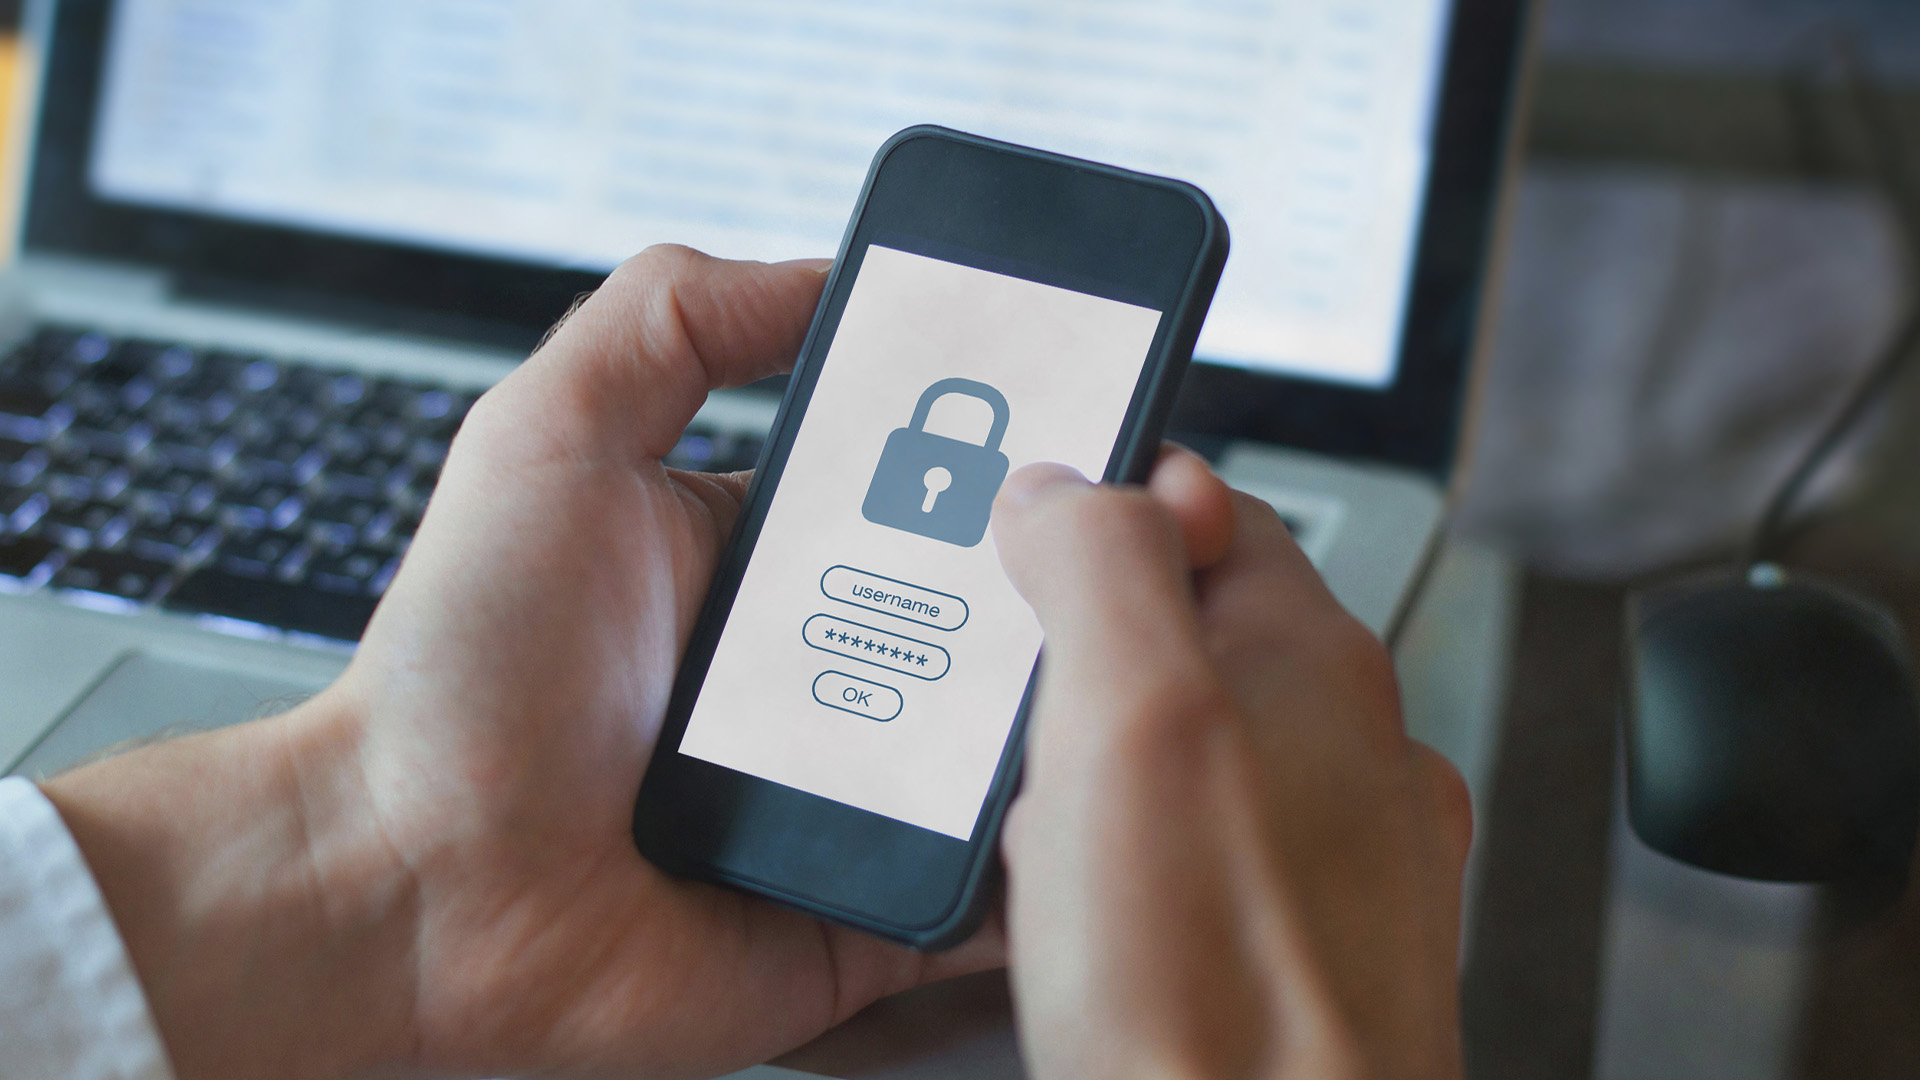 Protect Your Identity Now: Use This Quick Password ‘Phrase Trick’ for Android and iPhone Security